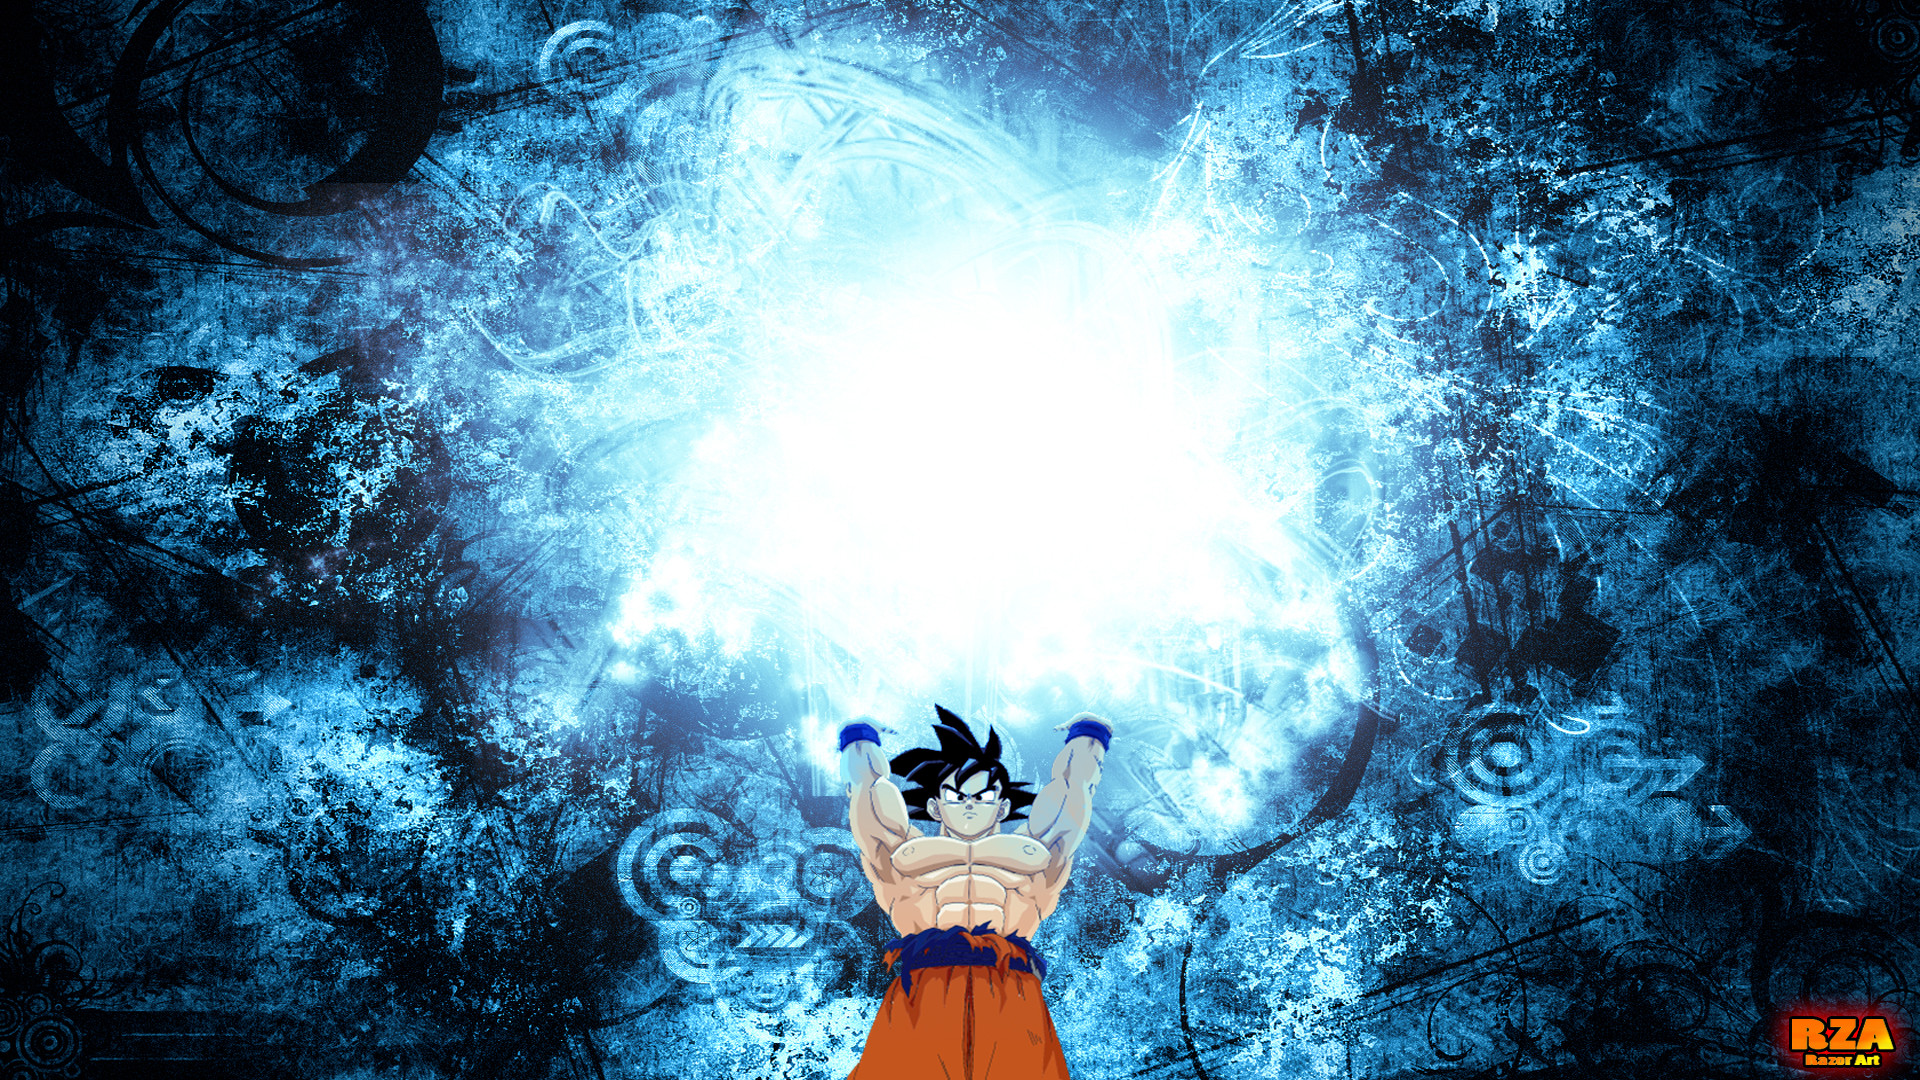 Dragon Ball Z Background, Desktop Wallpapers, Objfbt 1 4ai, Games Profile  Picture Background Image And Wallpaper for Free Download